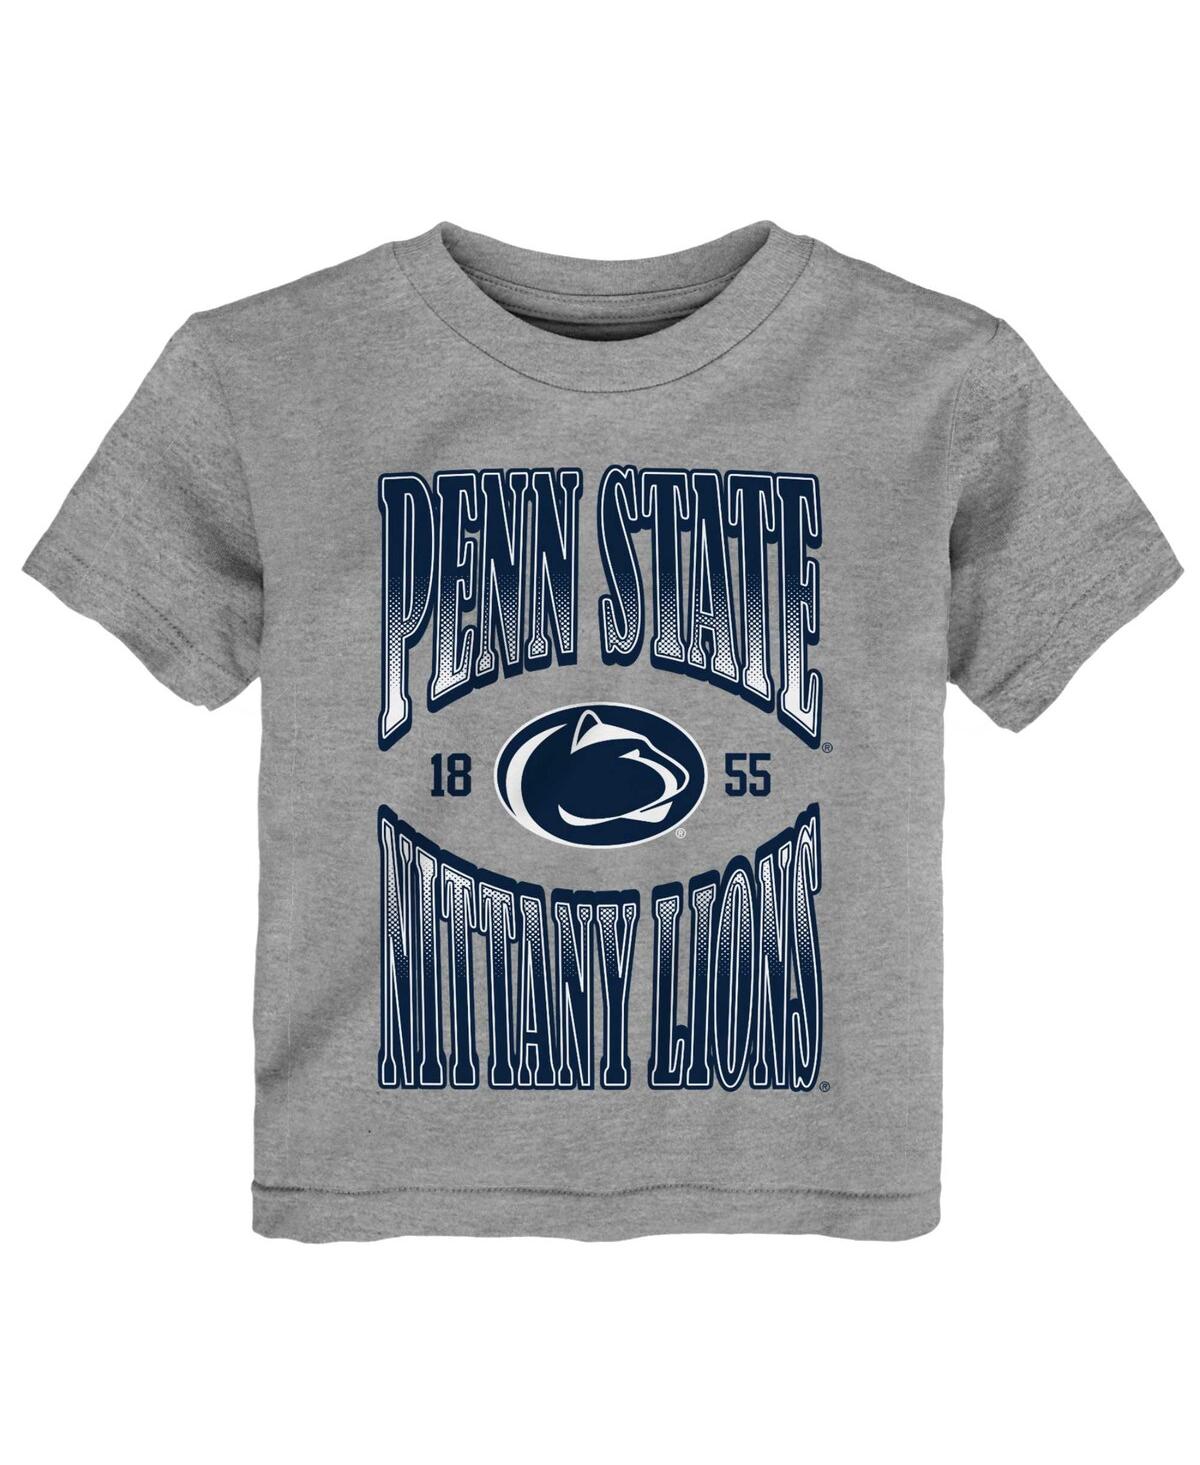 Outerstuff Babies' Toddler Boys And Girls Heather Gray Penn State Nittany Lions Top Class T-shirt